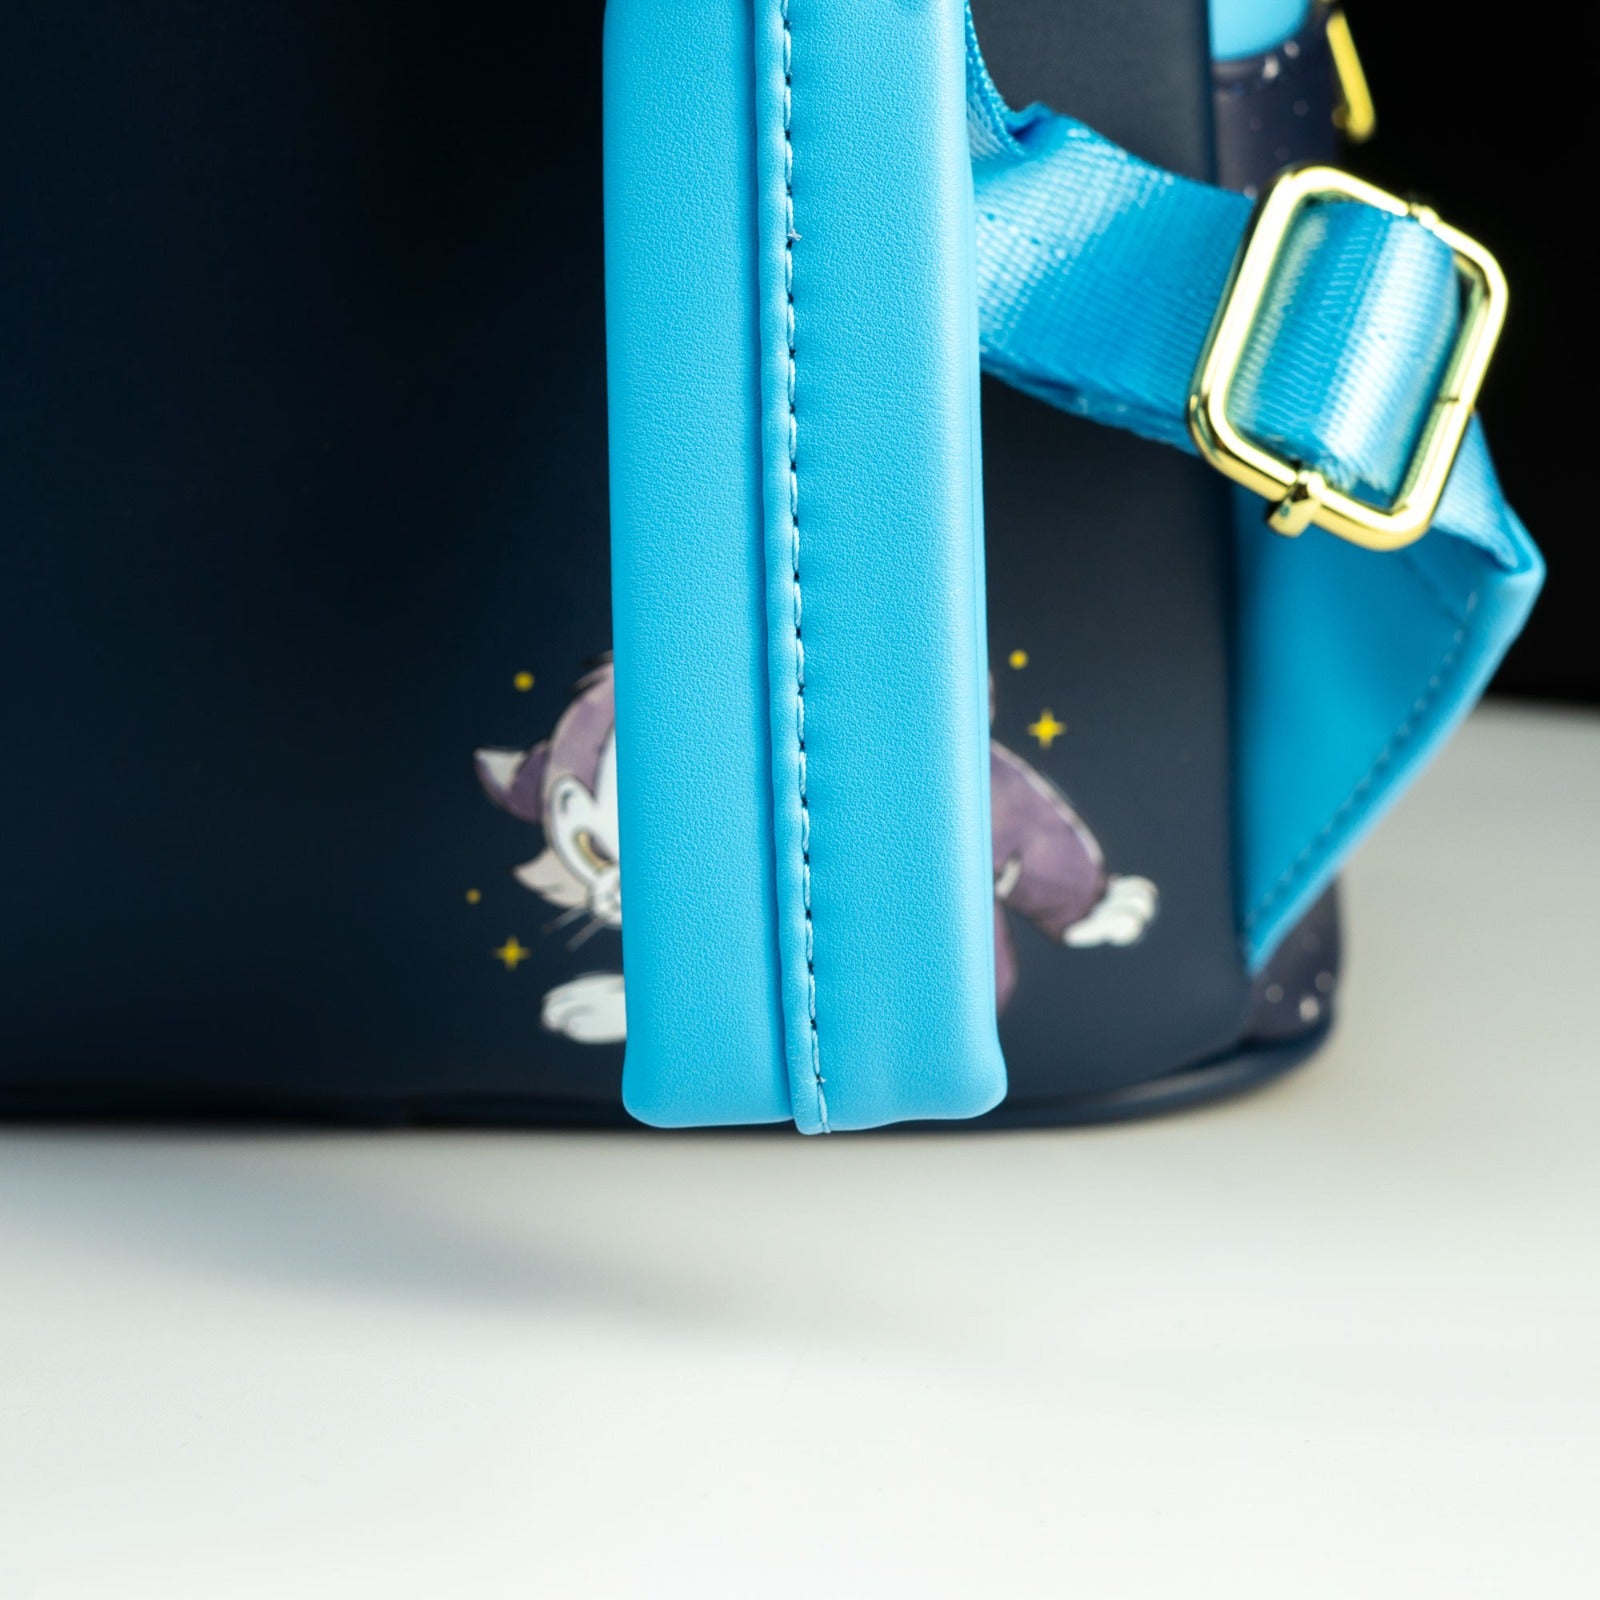 Loungefly x Disney Pinocchio Wish Upon a Star Mini Backpack